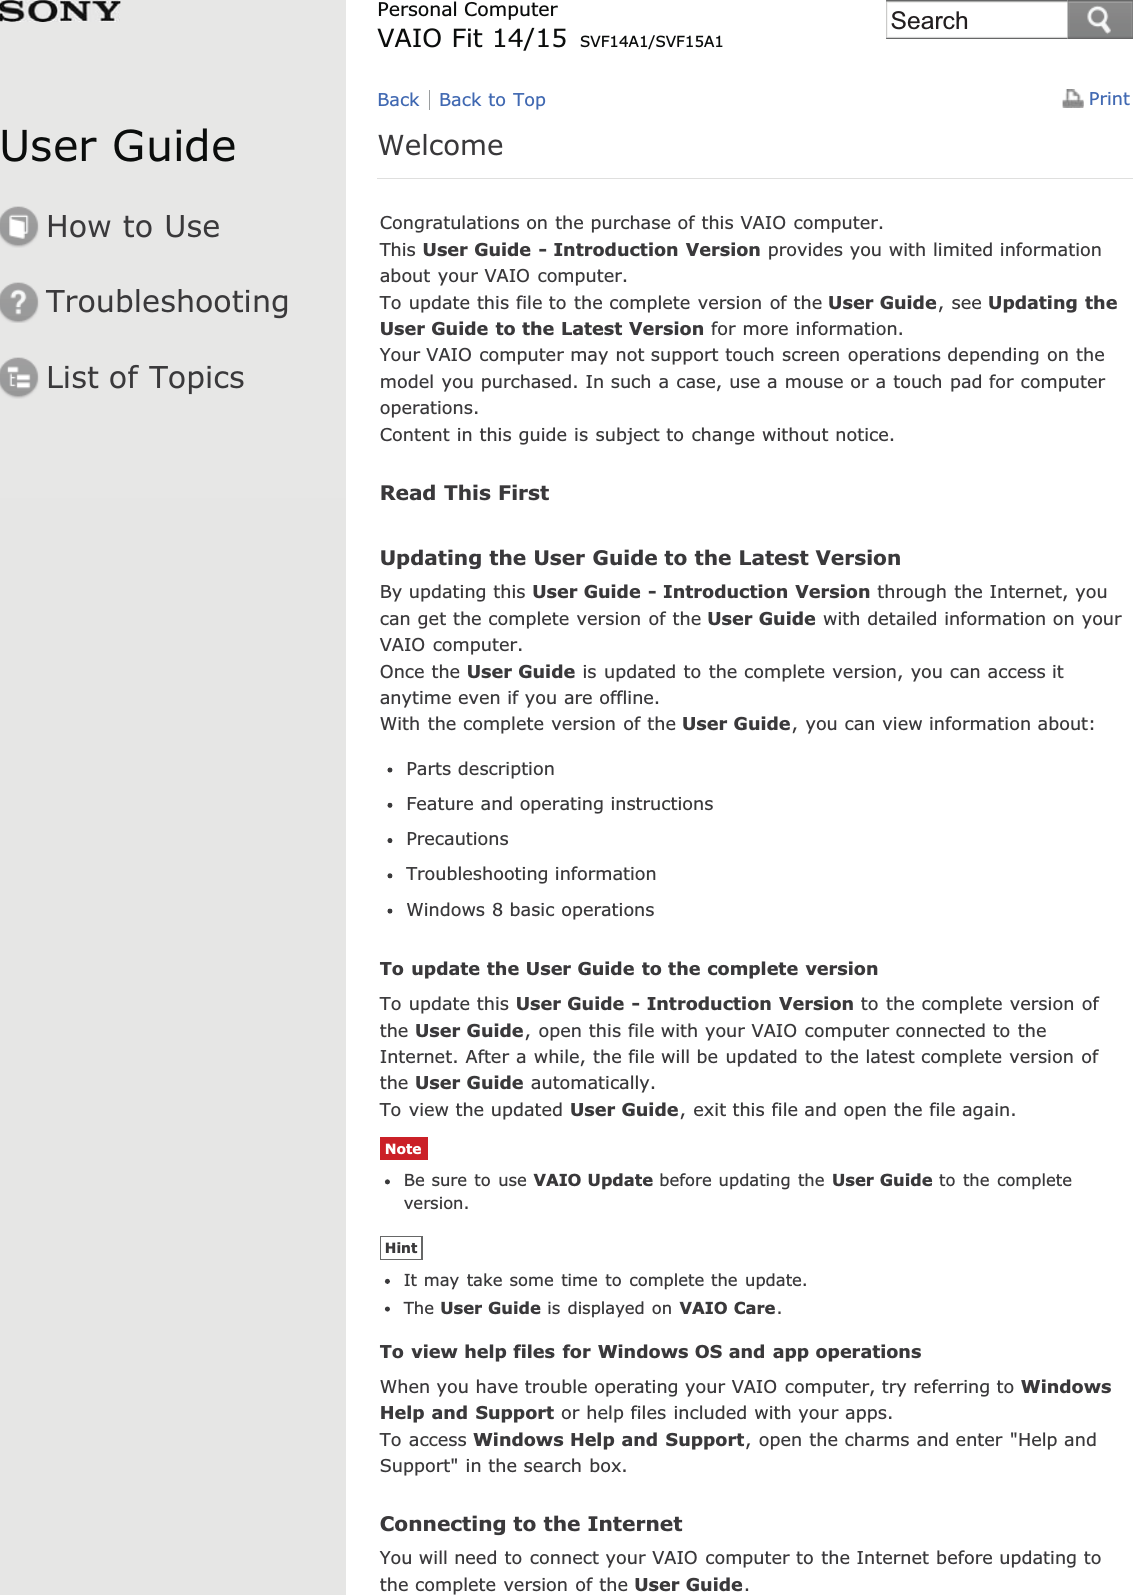 User GuideHow to UseTroubleshootingList of TopicsPrintPersonal ComputerVAIO Fit 14/15 SVF14A1/SVF15A1WelcomeCongratulations on the purchase of this VAIO computer.This User Guide - Introduction Version provides you with limited informationabout your VAIO computer.To update this file to the complete version of the User Guide, see Updating theUser Guide to the Latest Version for more information.Your VAIO computer may not support touch screen operations depending on themodel you purchased. In such a case, use a mouse or a touch pad for computeroperations.Content in this guide is subject to change without notice.Read This FirstUpdating the User Guide to the Latest VersionBy updating this User Guide - Introduction Version through the Internet, youcan get the complete version of the User Guide with detailed information on yourVAIO computer.Once the User Guide is updated to the complete version, you can access itanytime even if you are offline.With the complete version of the User Guide, you can view information about:Parts descriptionFeature and operating instructionsPrecautionsTroubleshooting informationWindows 8 basic operationsTo update the User Guide to the complete versionTo update this User Guide - Introduction Version to the complete version ofthe User Guide, open this file with your VAIO computer connected to theInternet. After a while, the file will be updated to the latest complete version ofthe User Guide automatically.To view the updated User Guide, exit this file and open the file again.NoteBe sure to use VAIO Update before updating the User Guide to the completeversion.HintIt may take some time to complete the update.The User Guide is displayed on VAIO Care.To view help files for Windows OS and app operationsWhen you have trouble operating your VAIO computer, try referring to WindowsHelp and Support or help files included with your apps.To access Windows Help and Support, open the charms and enter &quot;Help andSupport&quot; in the search box.Connecting to the InternetYou will need to connect your VAIO computer to the Internet before updating tothe complete version of the User Guide.Back Back to TopSearch